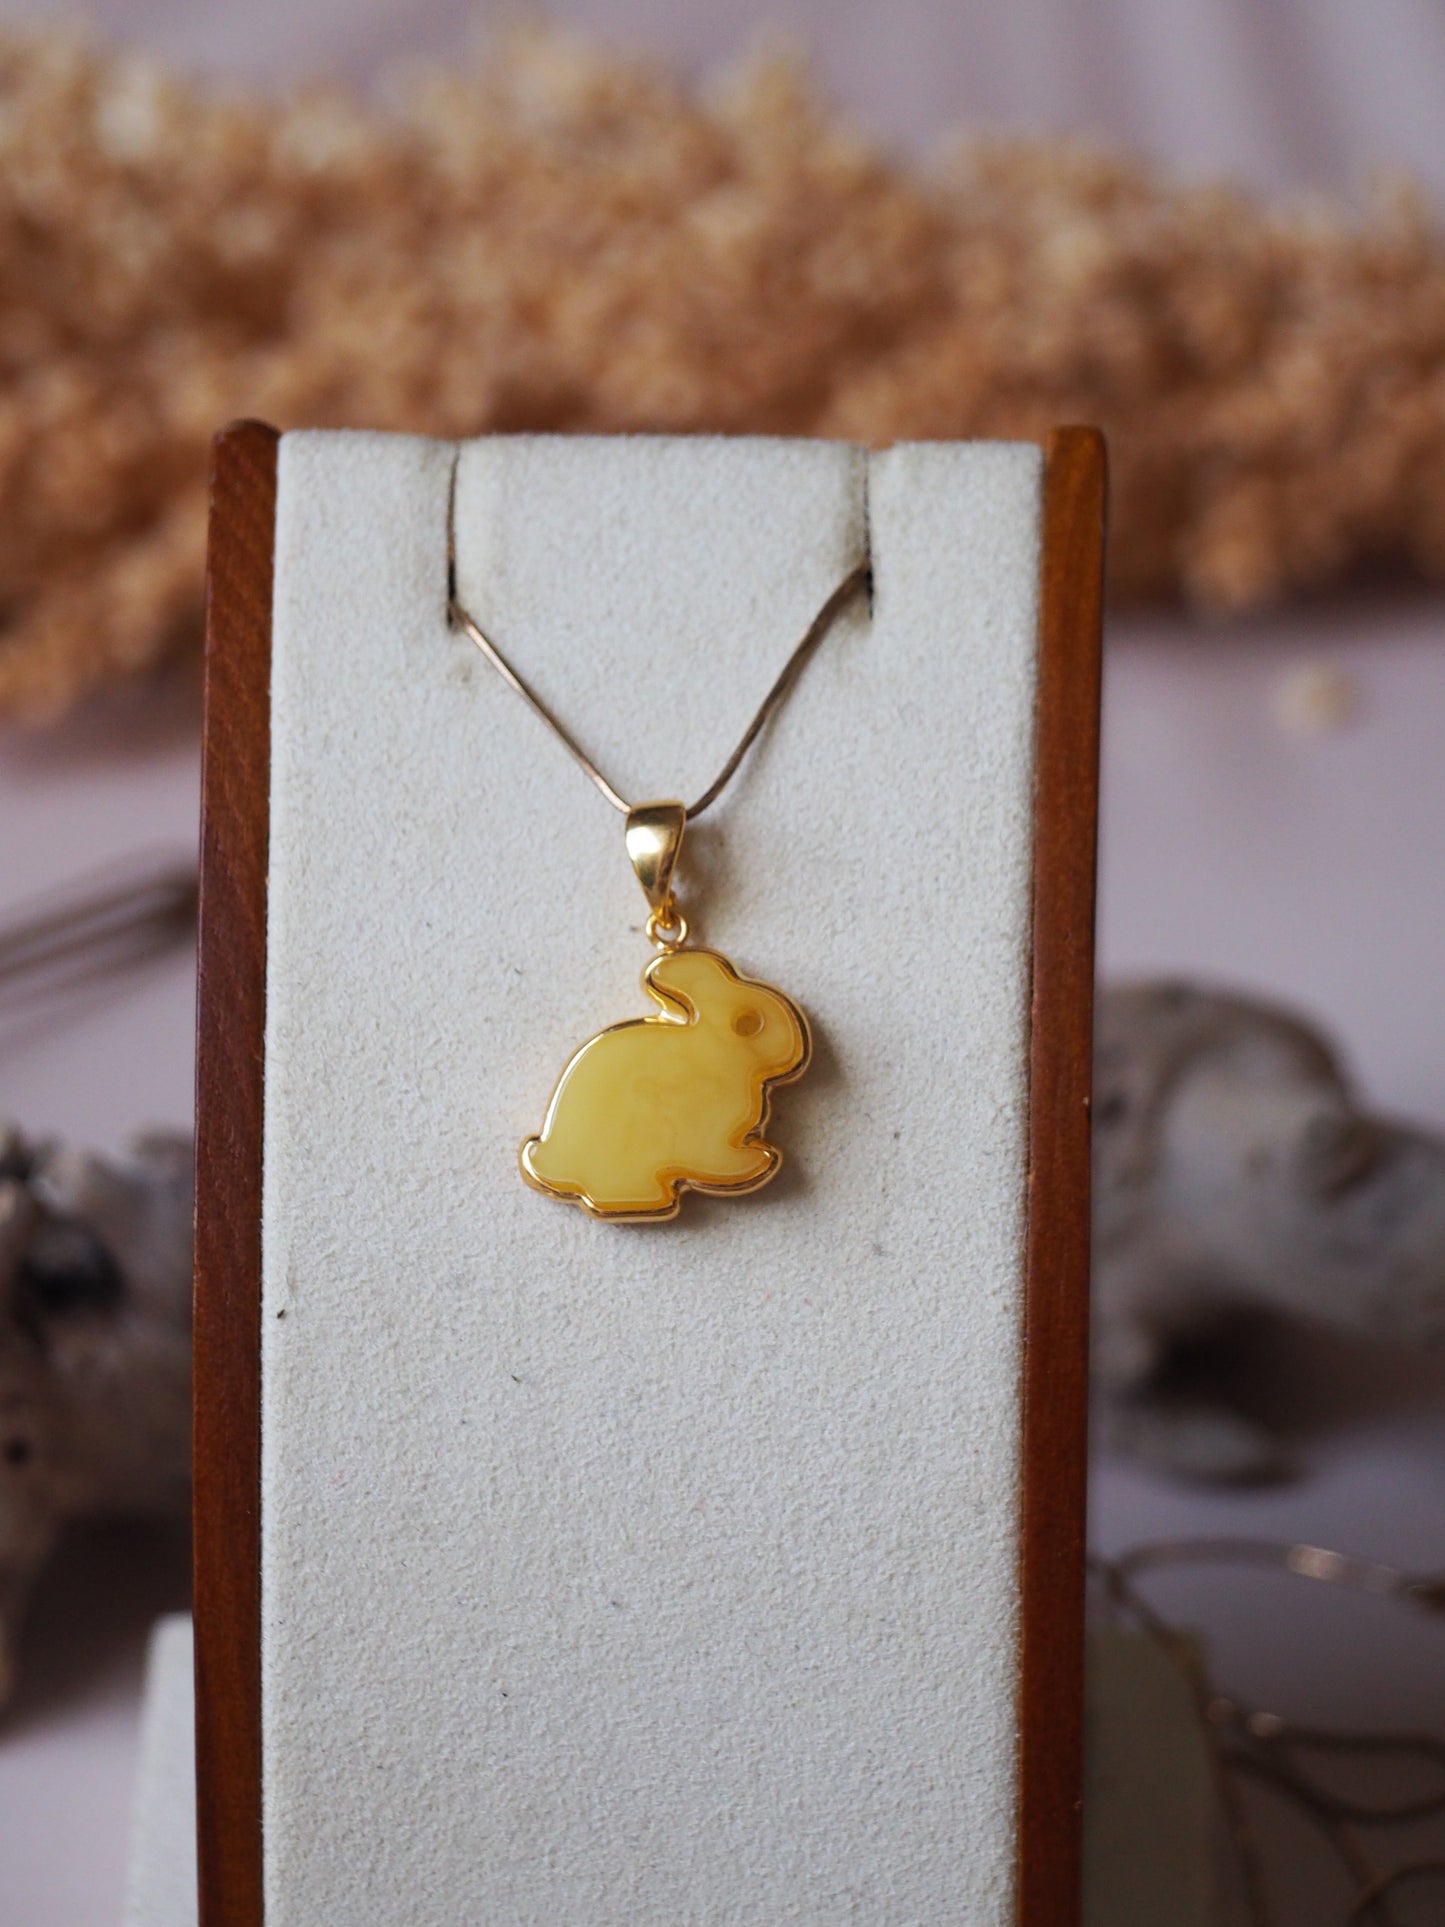 Honey Amber Rabbit Charm/ Pendant in Gold Pleated Silver